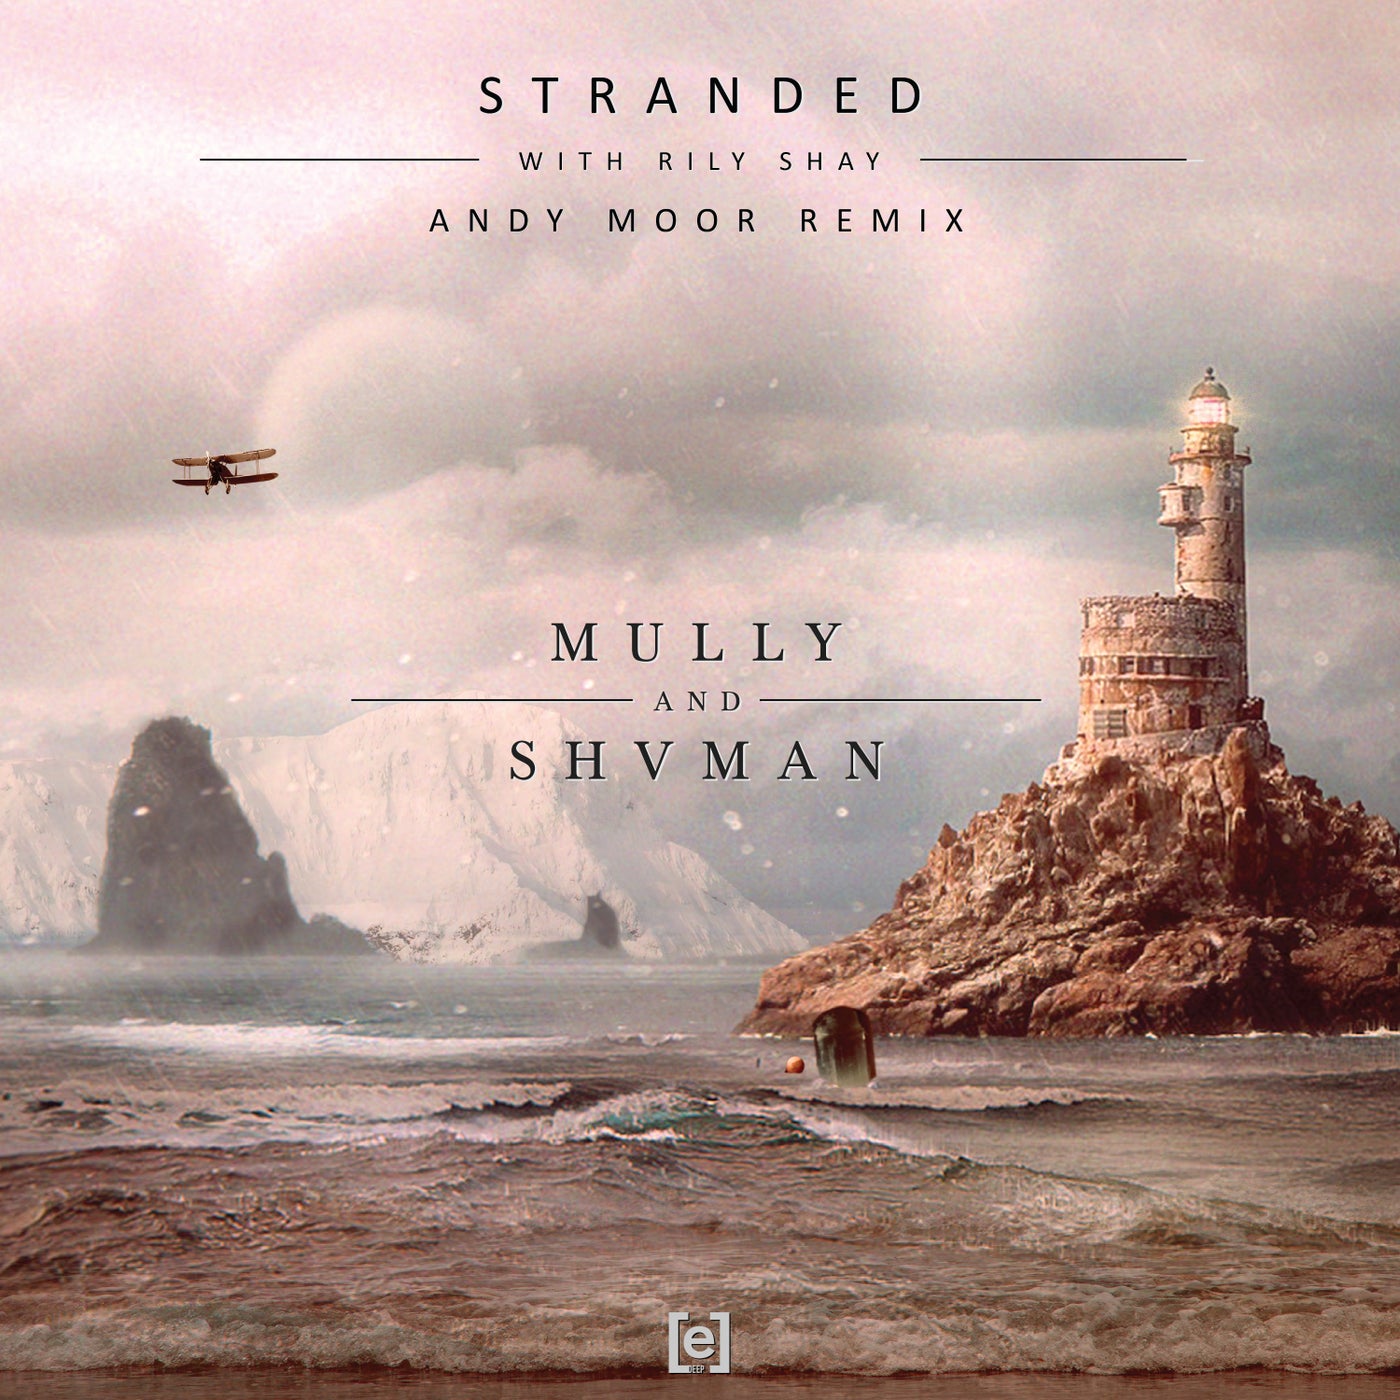 Stranded (Andy Moor Remix)